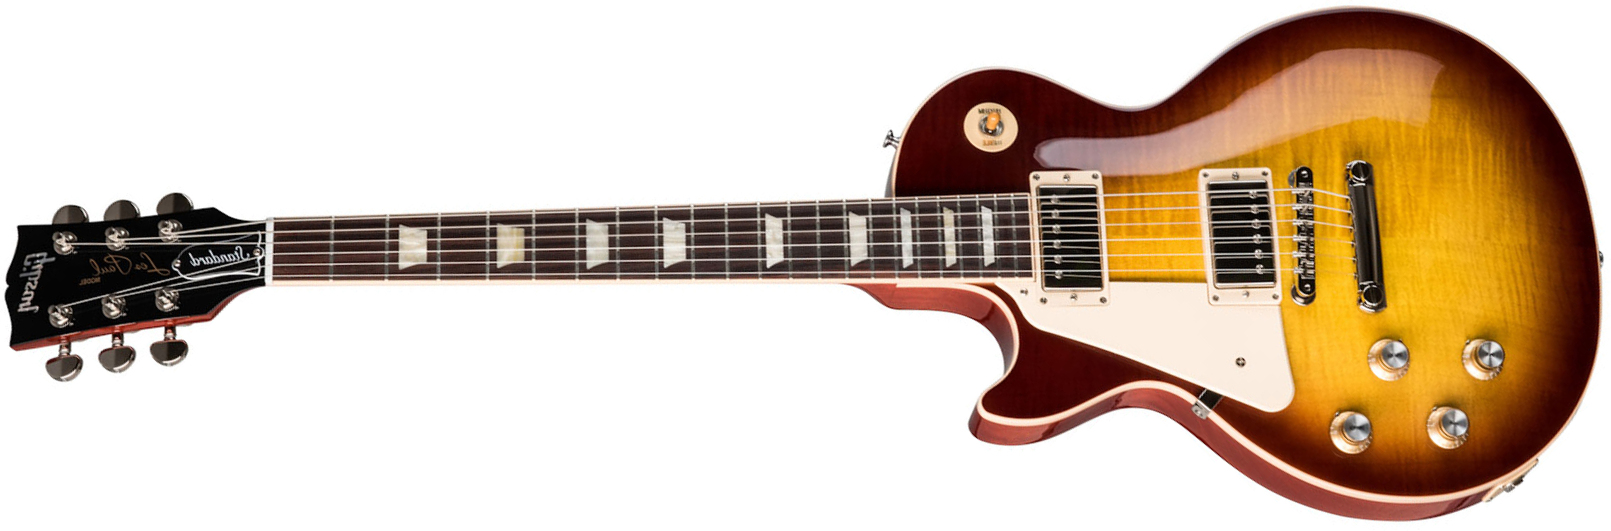 Gibson Les Paul Standard 60s Lh Gaucher 2h Ht Rw - Iced Tea - Left-handed electric guitar - Main picture